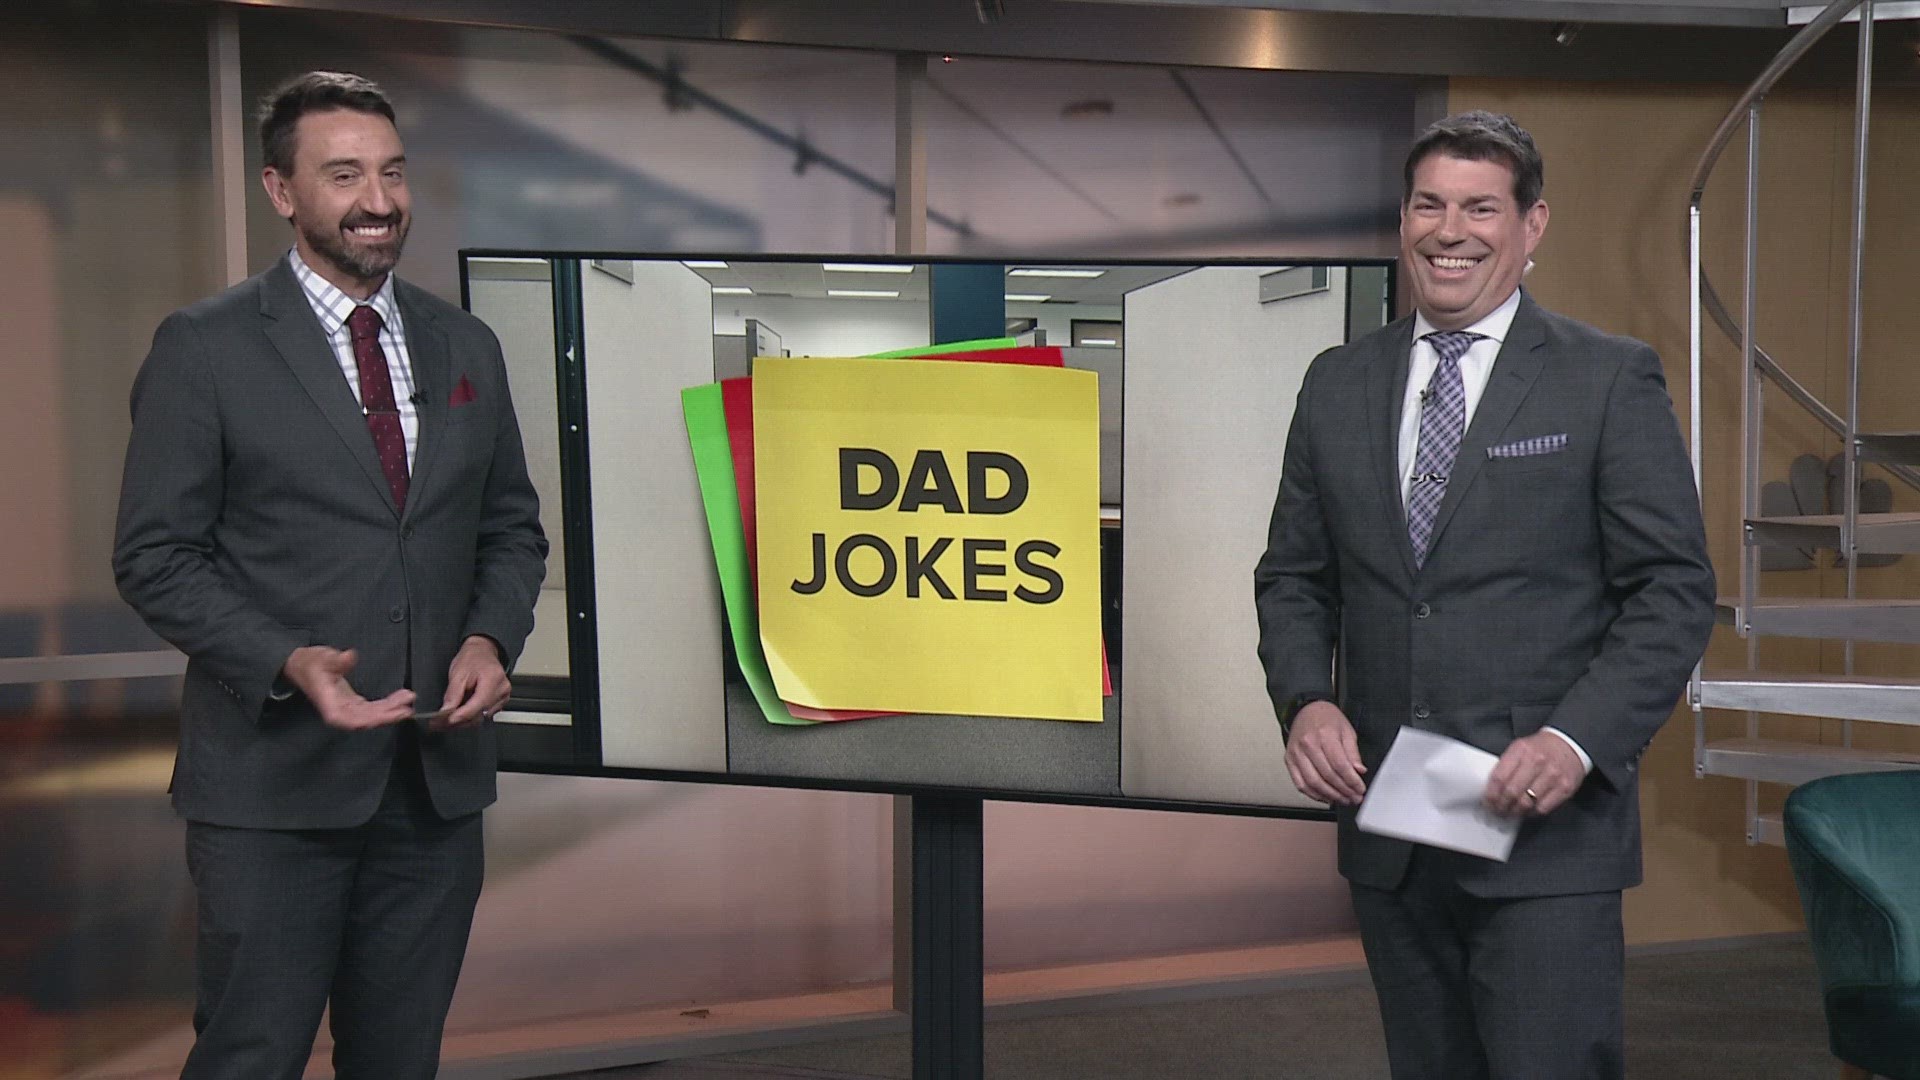 Ready for a good laugh? Here's today's edition of dad jokes with Matt Wintz and Dave Chudowsky on WKYC.